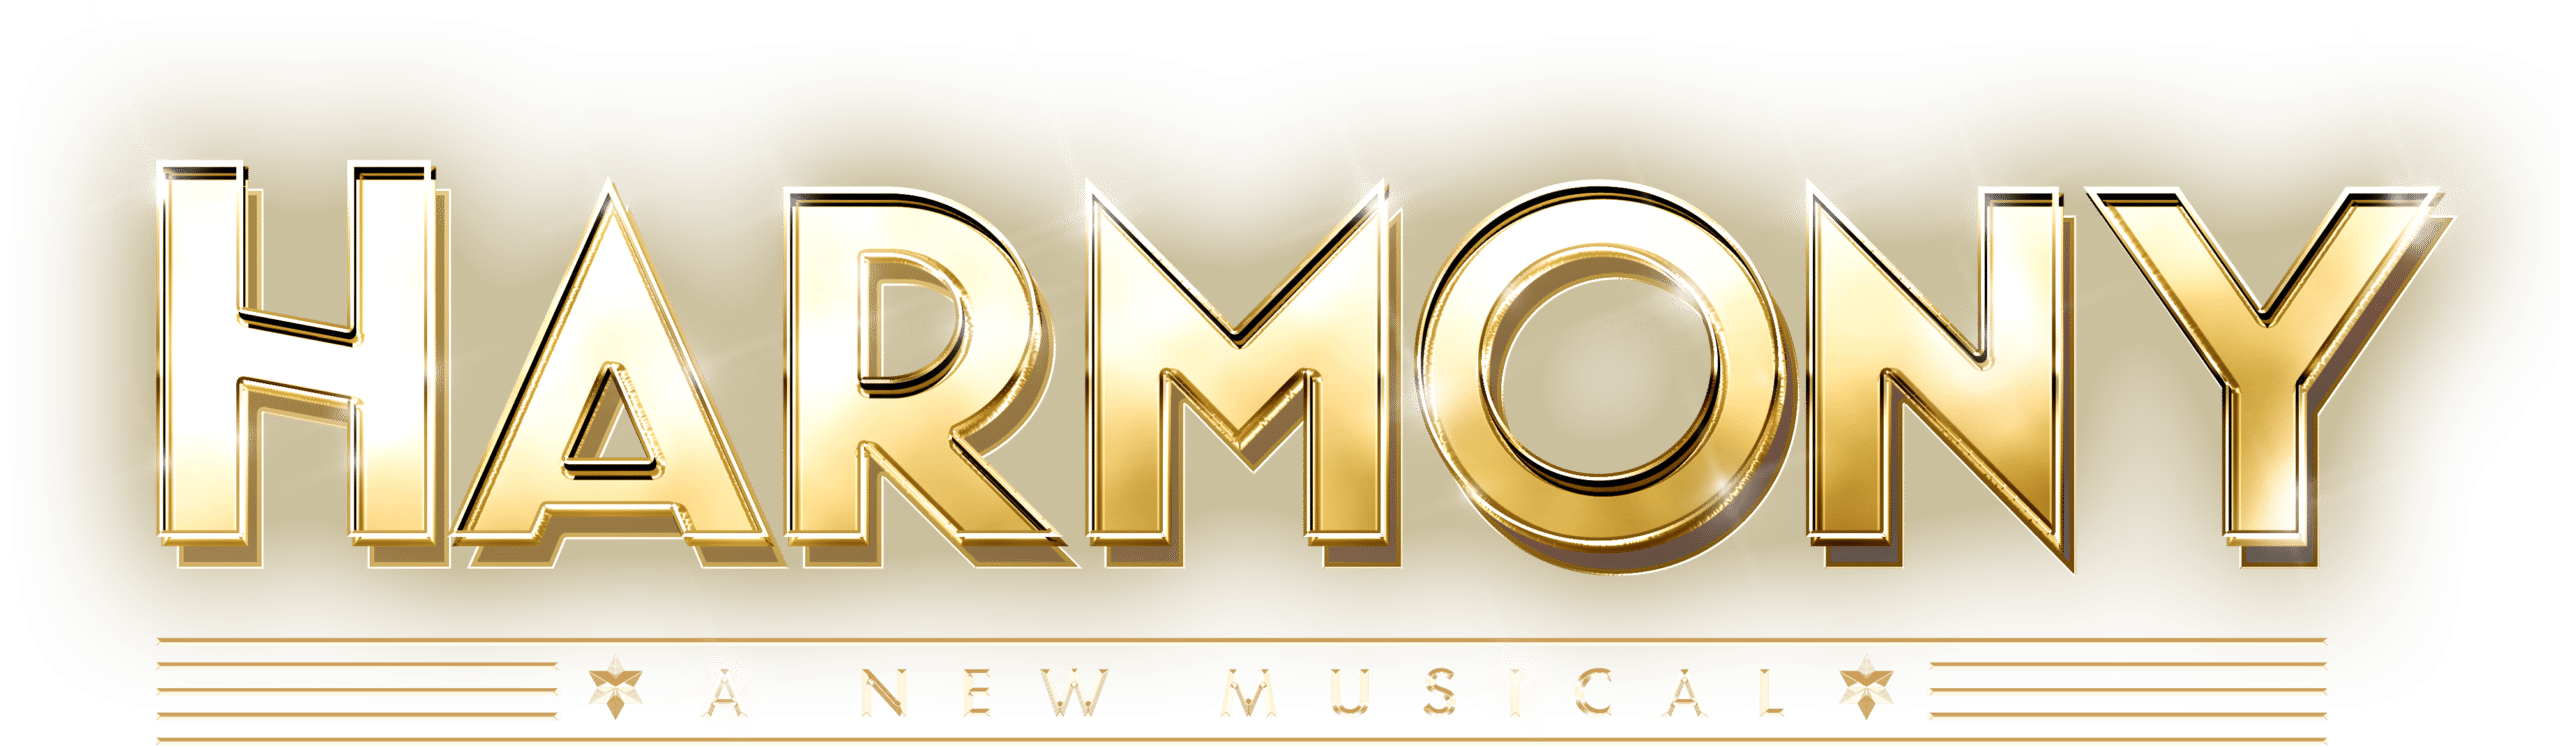 Harmony: A New Musical • TKTS Now On Sale! • Barry Manilow